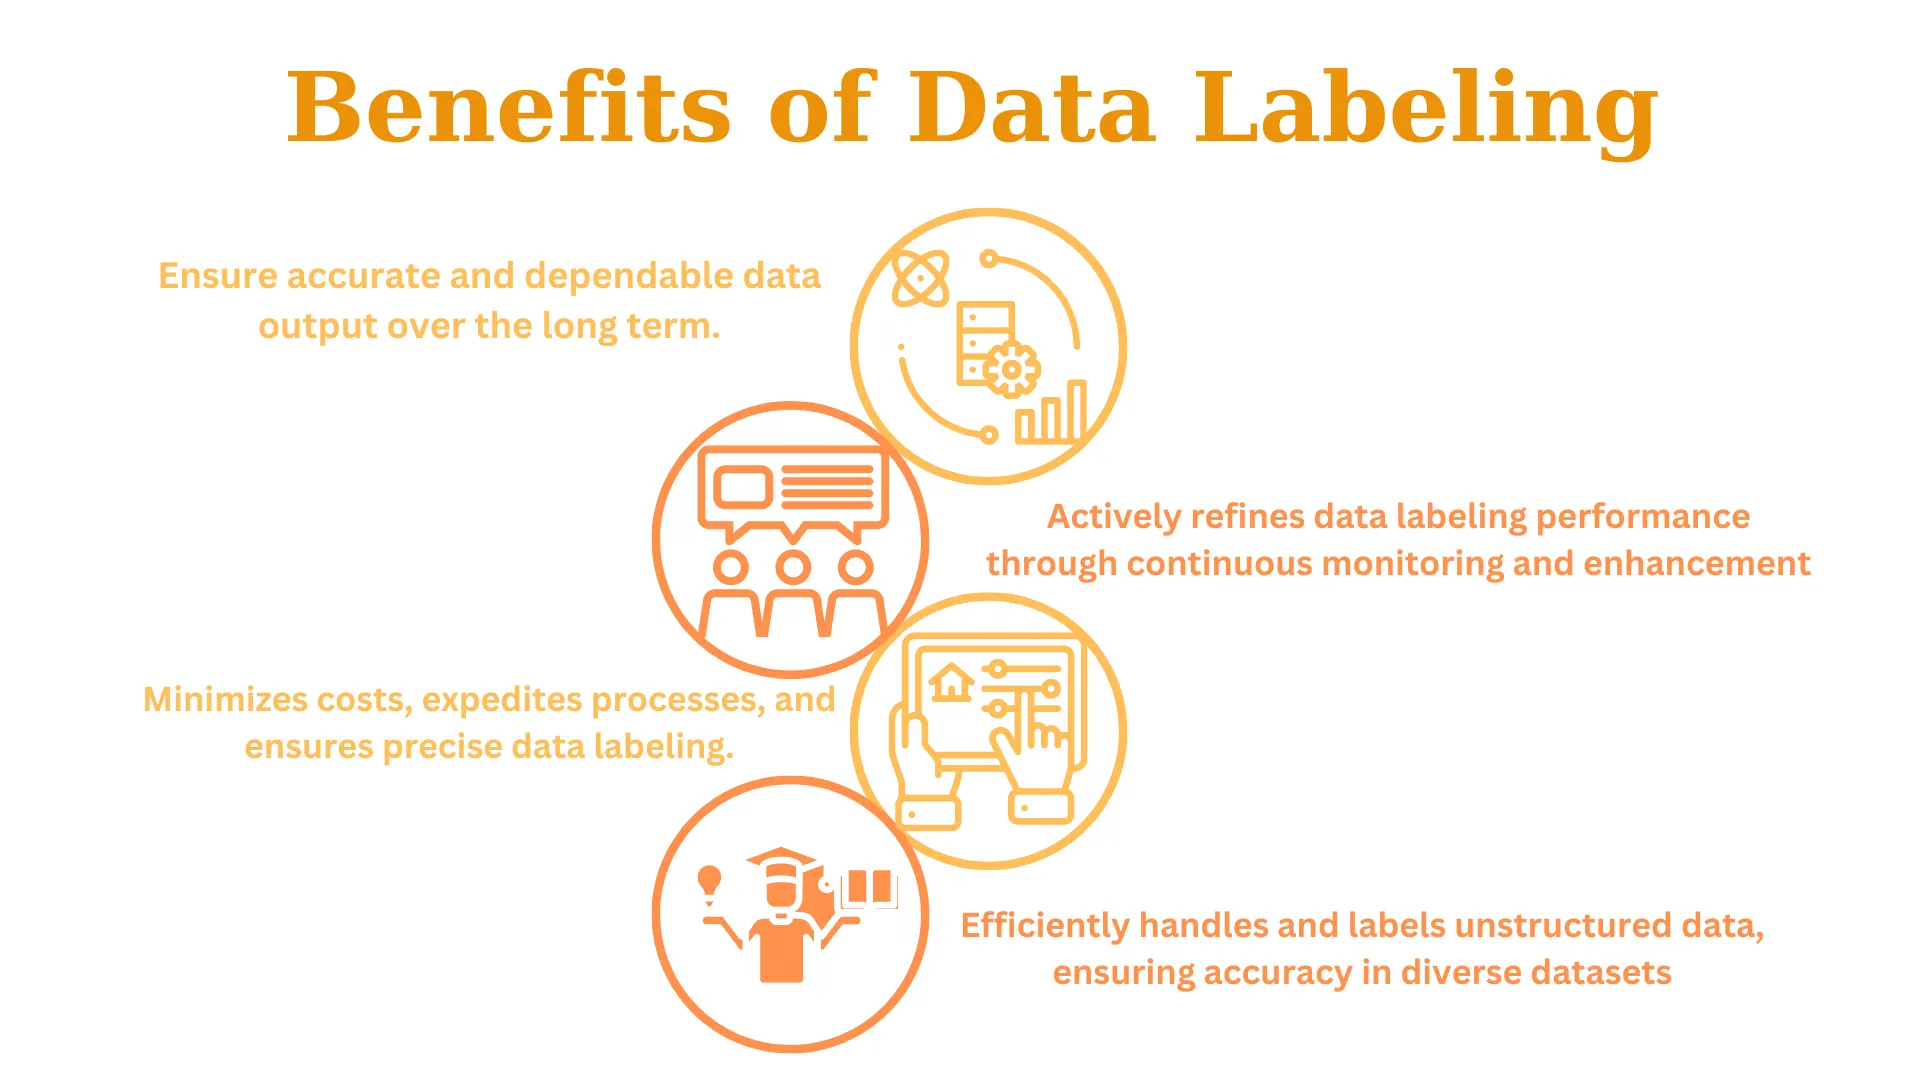 Benefits of data labeling